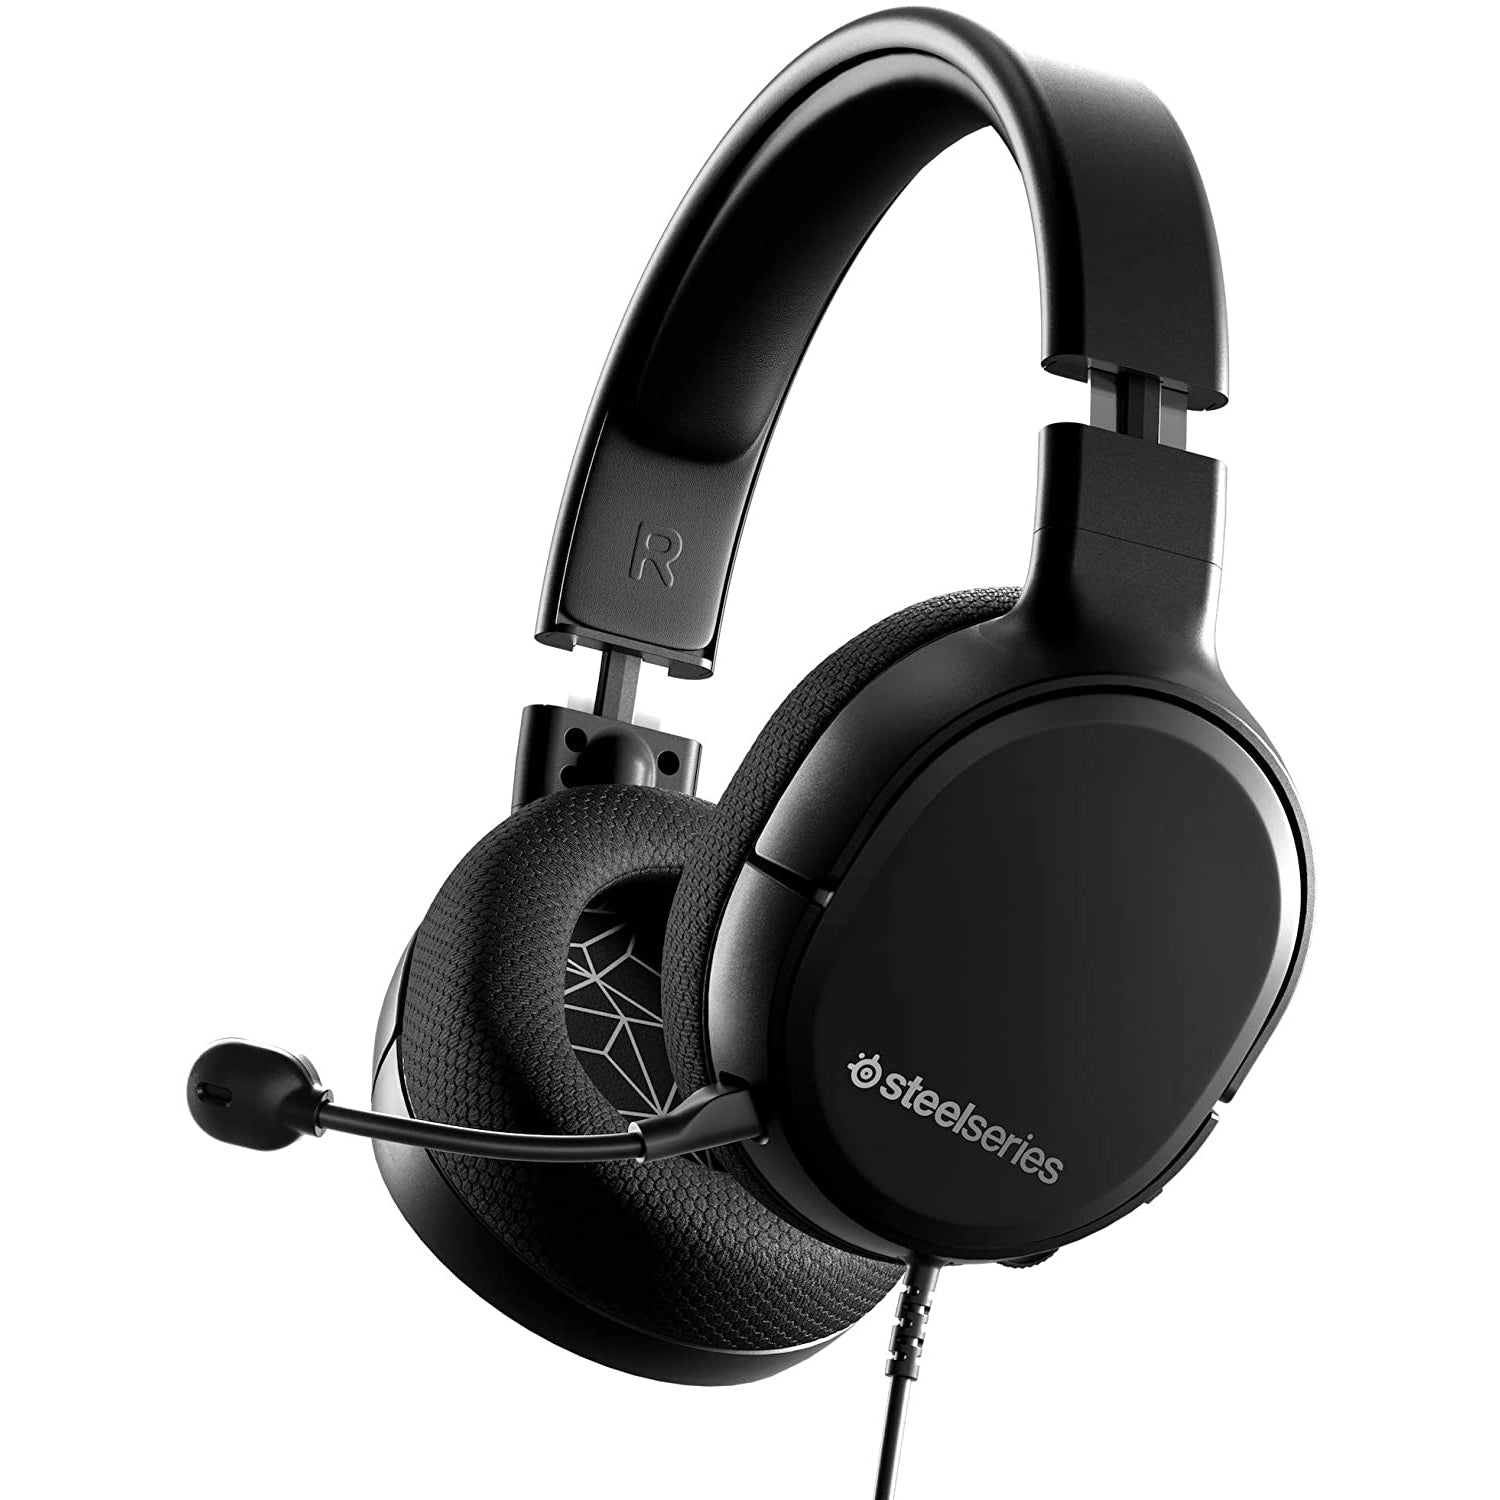 SteelSeries Arctis 1 Wired Gaming Headset for Xbox, PC & Android, Black - Refurbished Good